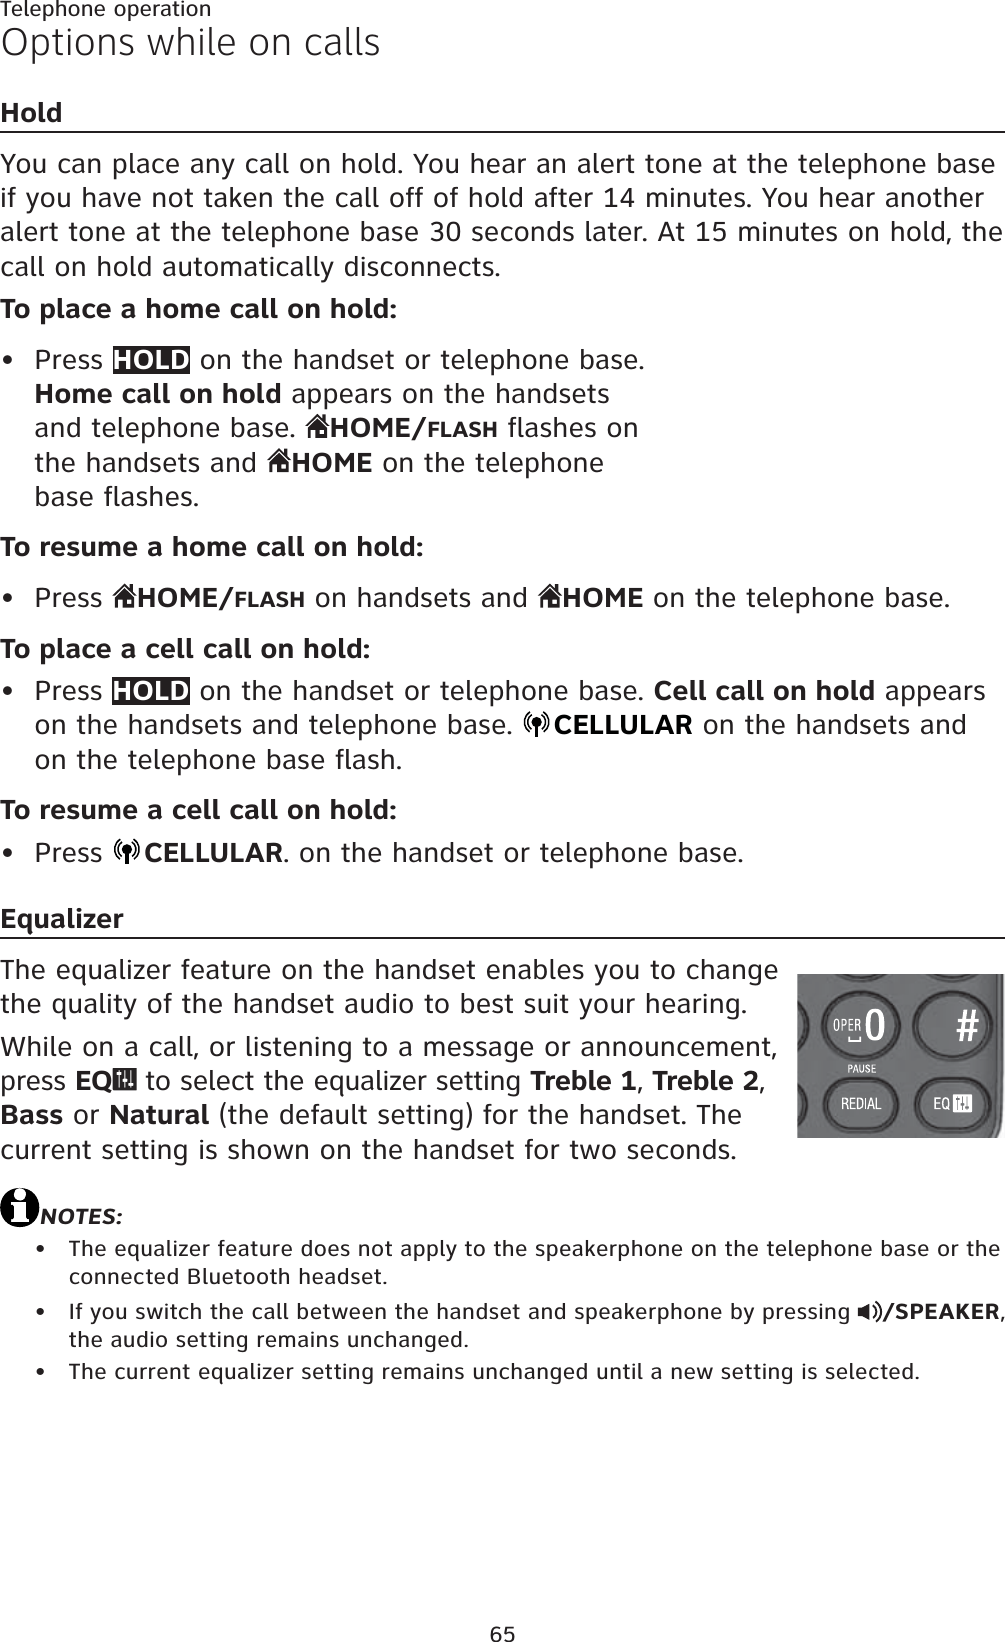 65Telephone operationOptions while on callsHoldYou can place any call on hold. You hear an alert tone at the telephone base if you have not taken the call off of hold after 14 minutes. You hear another alert tone at the telephone base 30 seconds later. At 15 minutes on hold, the call on hold automatically disconnects.To place a home call on hold:Press HOLD on the handset or telephone base. Home call on hold appears on the handsets and telephone base.  HOME/FLASH flashes on the handsets and  HOME on the telephone base flashes.To resume a home call on hold:Press  HOME/FLASH on handsets and  HOME on the telephone base.To place a cell call on hold:Press HOLD on the handset or telephone base. Cell call on hold appears on the handsets and telephone base.  CELLULAR on the handsets andon the telephone base flash.To resume a cell call on hold:Press  CELLULAR. on the handset or telephone base.EqualizerThe equalizer feature on the handset enables you to change the quality of the handset audio to best suit your hearing.While on a call, or listening to a message or announcement, press EQ  to select the equalizer setting Treble 1, Treble 2,Bass or Natural (the default setting) for the handset. The current setting is shown on the handset for two seconds.NOTES:The equalizer feature does not apply to the speakerphone on the telephone base or the connected Bluetooth headset.If you switch the call between the handset and speakerphone by pressing  /SPEAKER,the audio setting remains unchanged.The current equalizer setting remains unchanged until a new setting is selected.•••••••